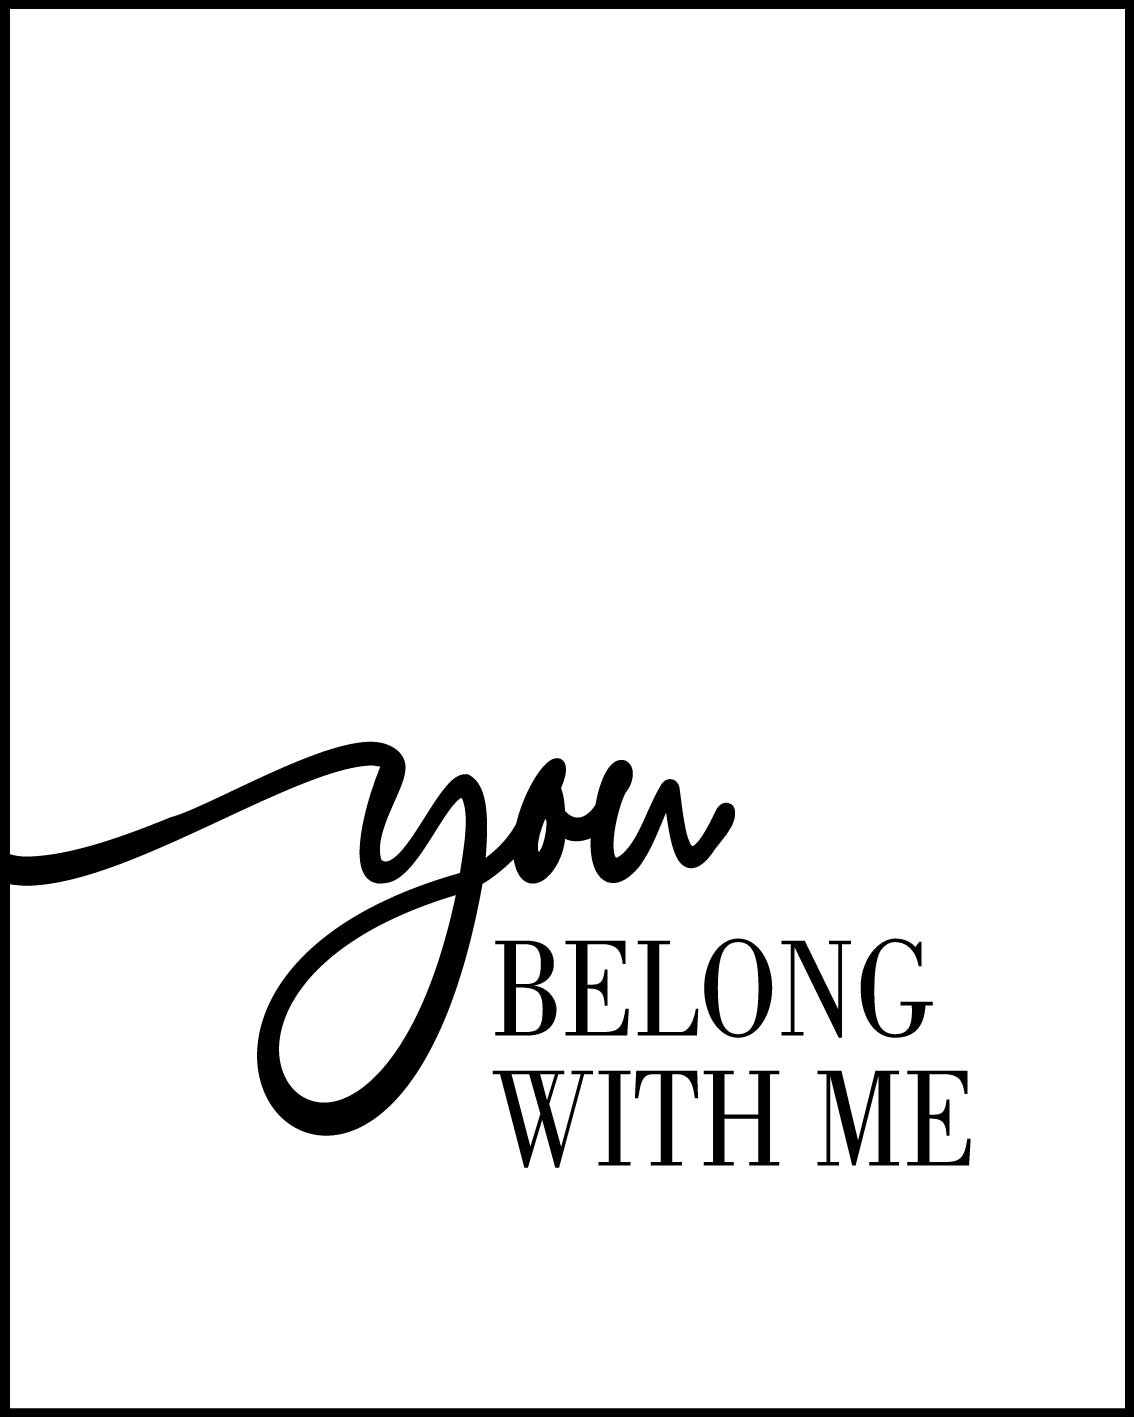 I belong with you you belong with me Posters